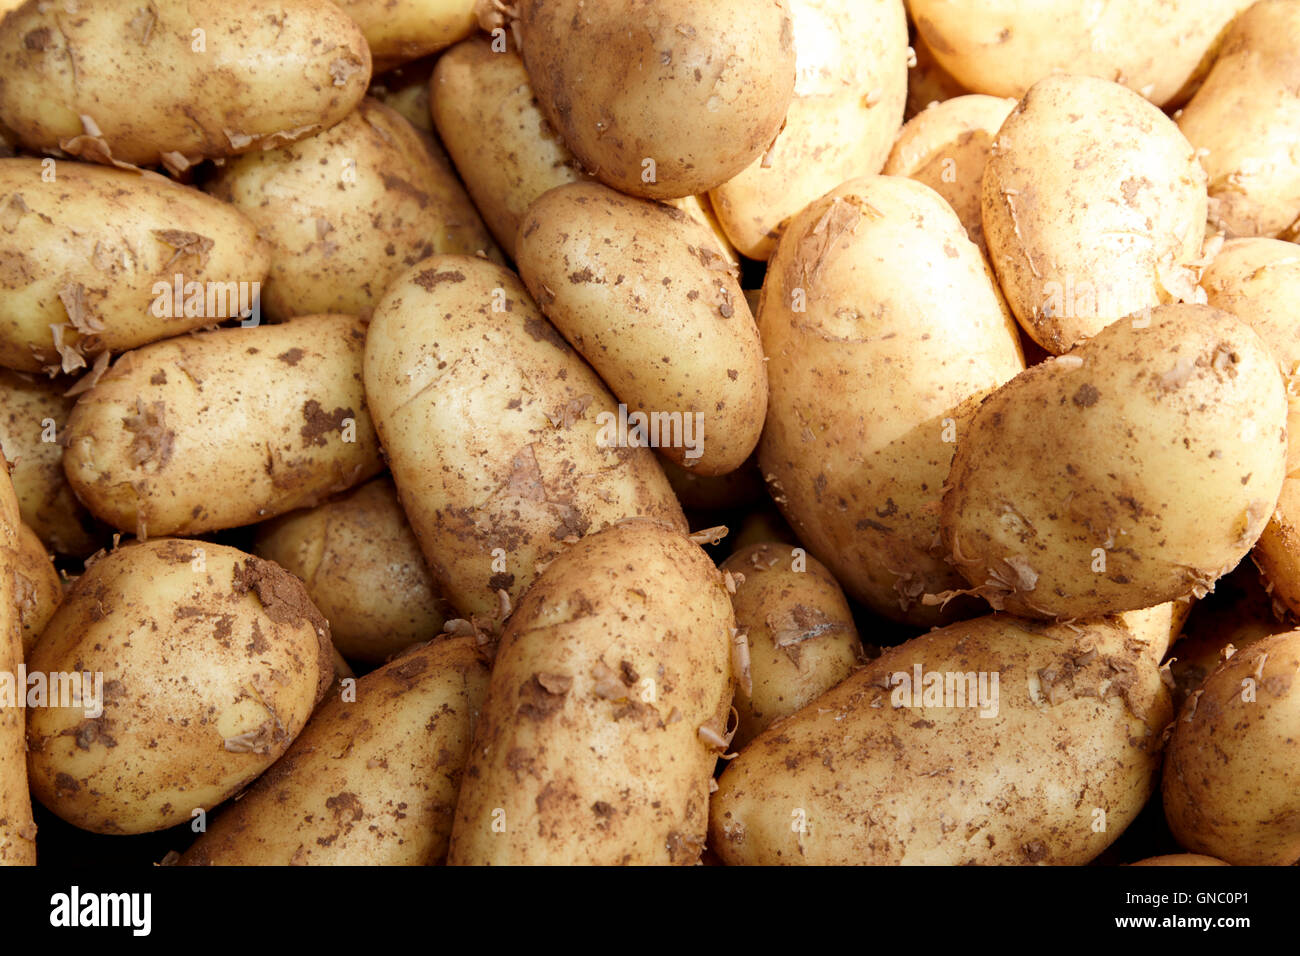 fresh new irish potatoes on display on a greengrocers food stall in the uk Stock Photo